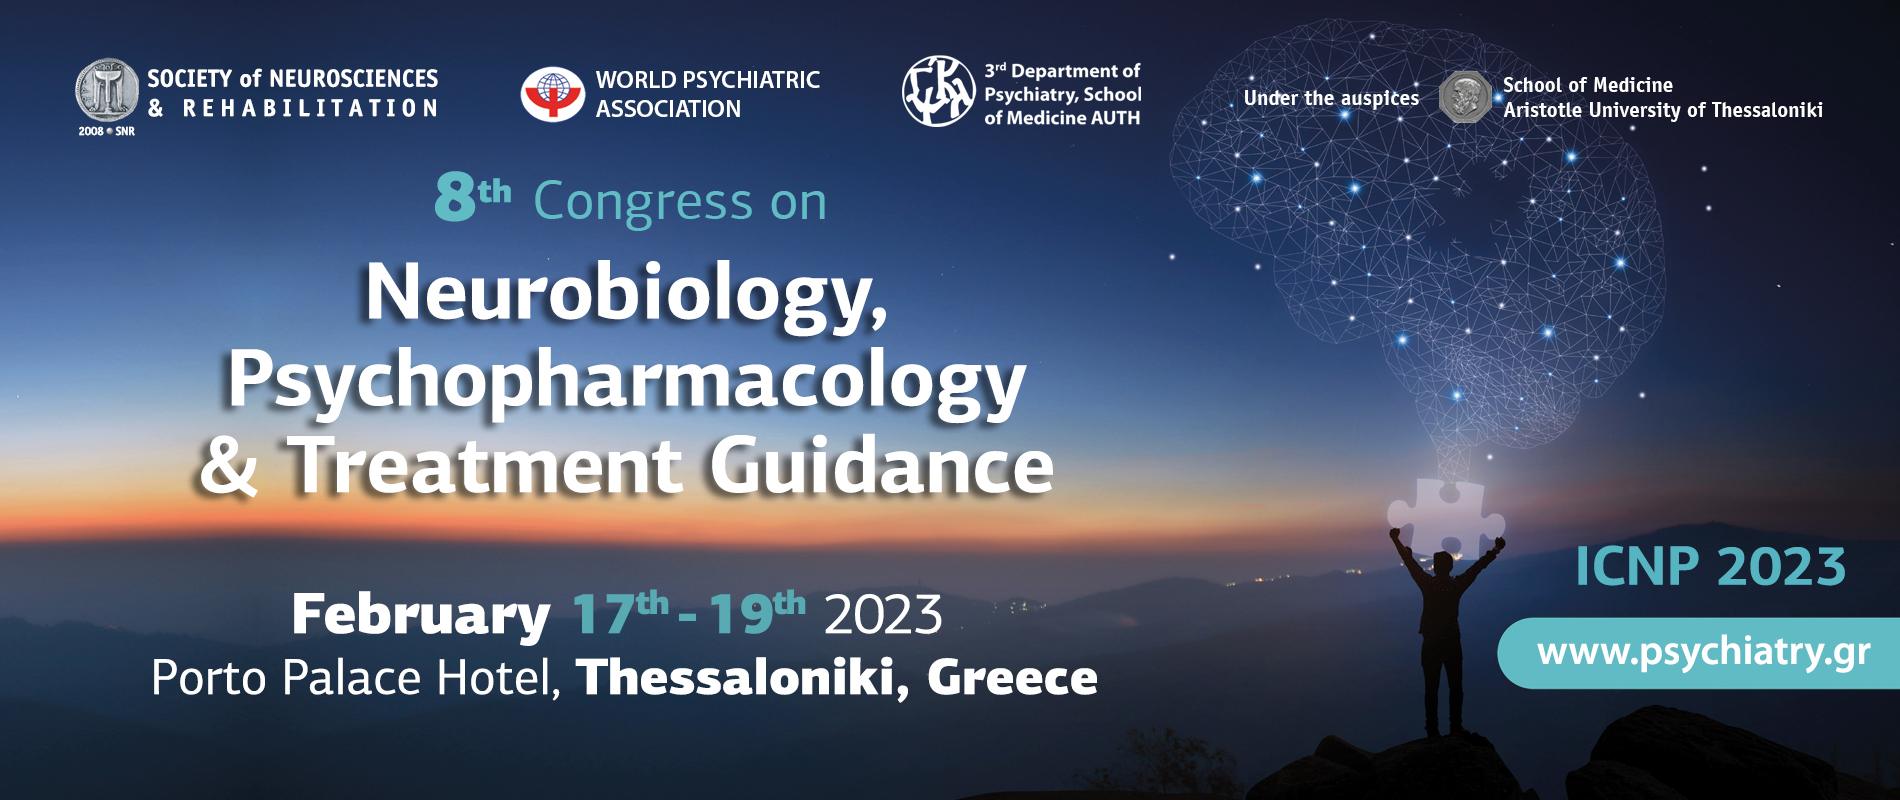 8th Congress on Neurobiology, Psychopharmacology & Treatment Guidance, February 17th -19th 2023, Porto Palace hotel, Thessaloniki, Greece